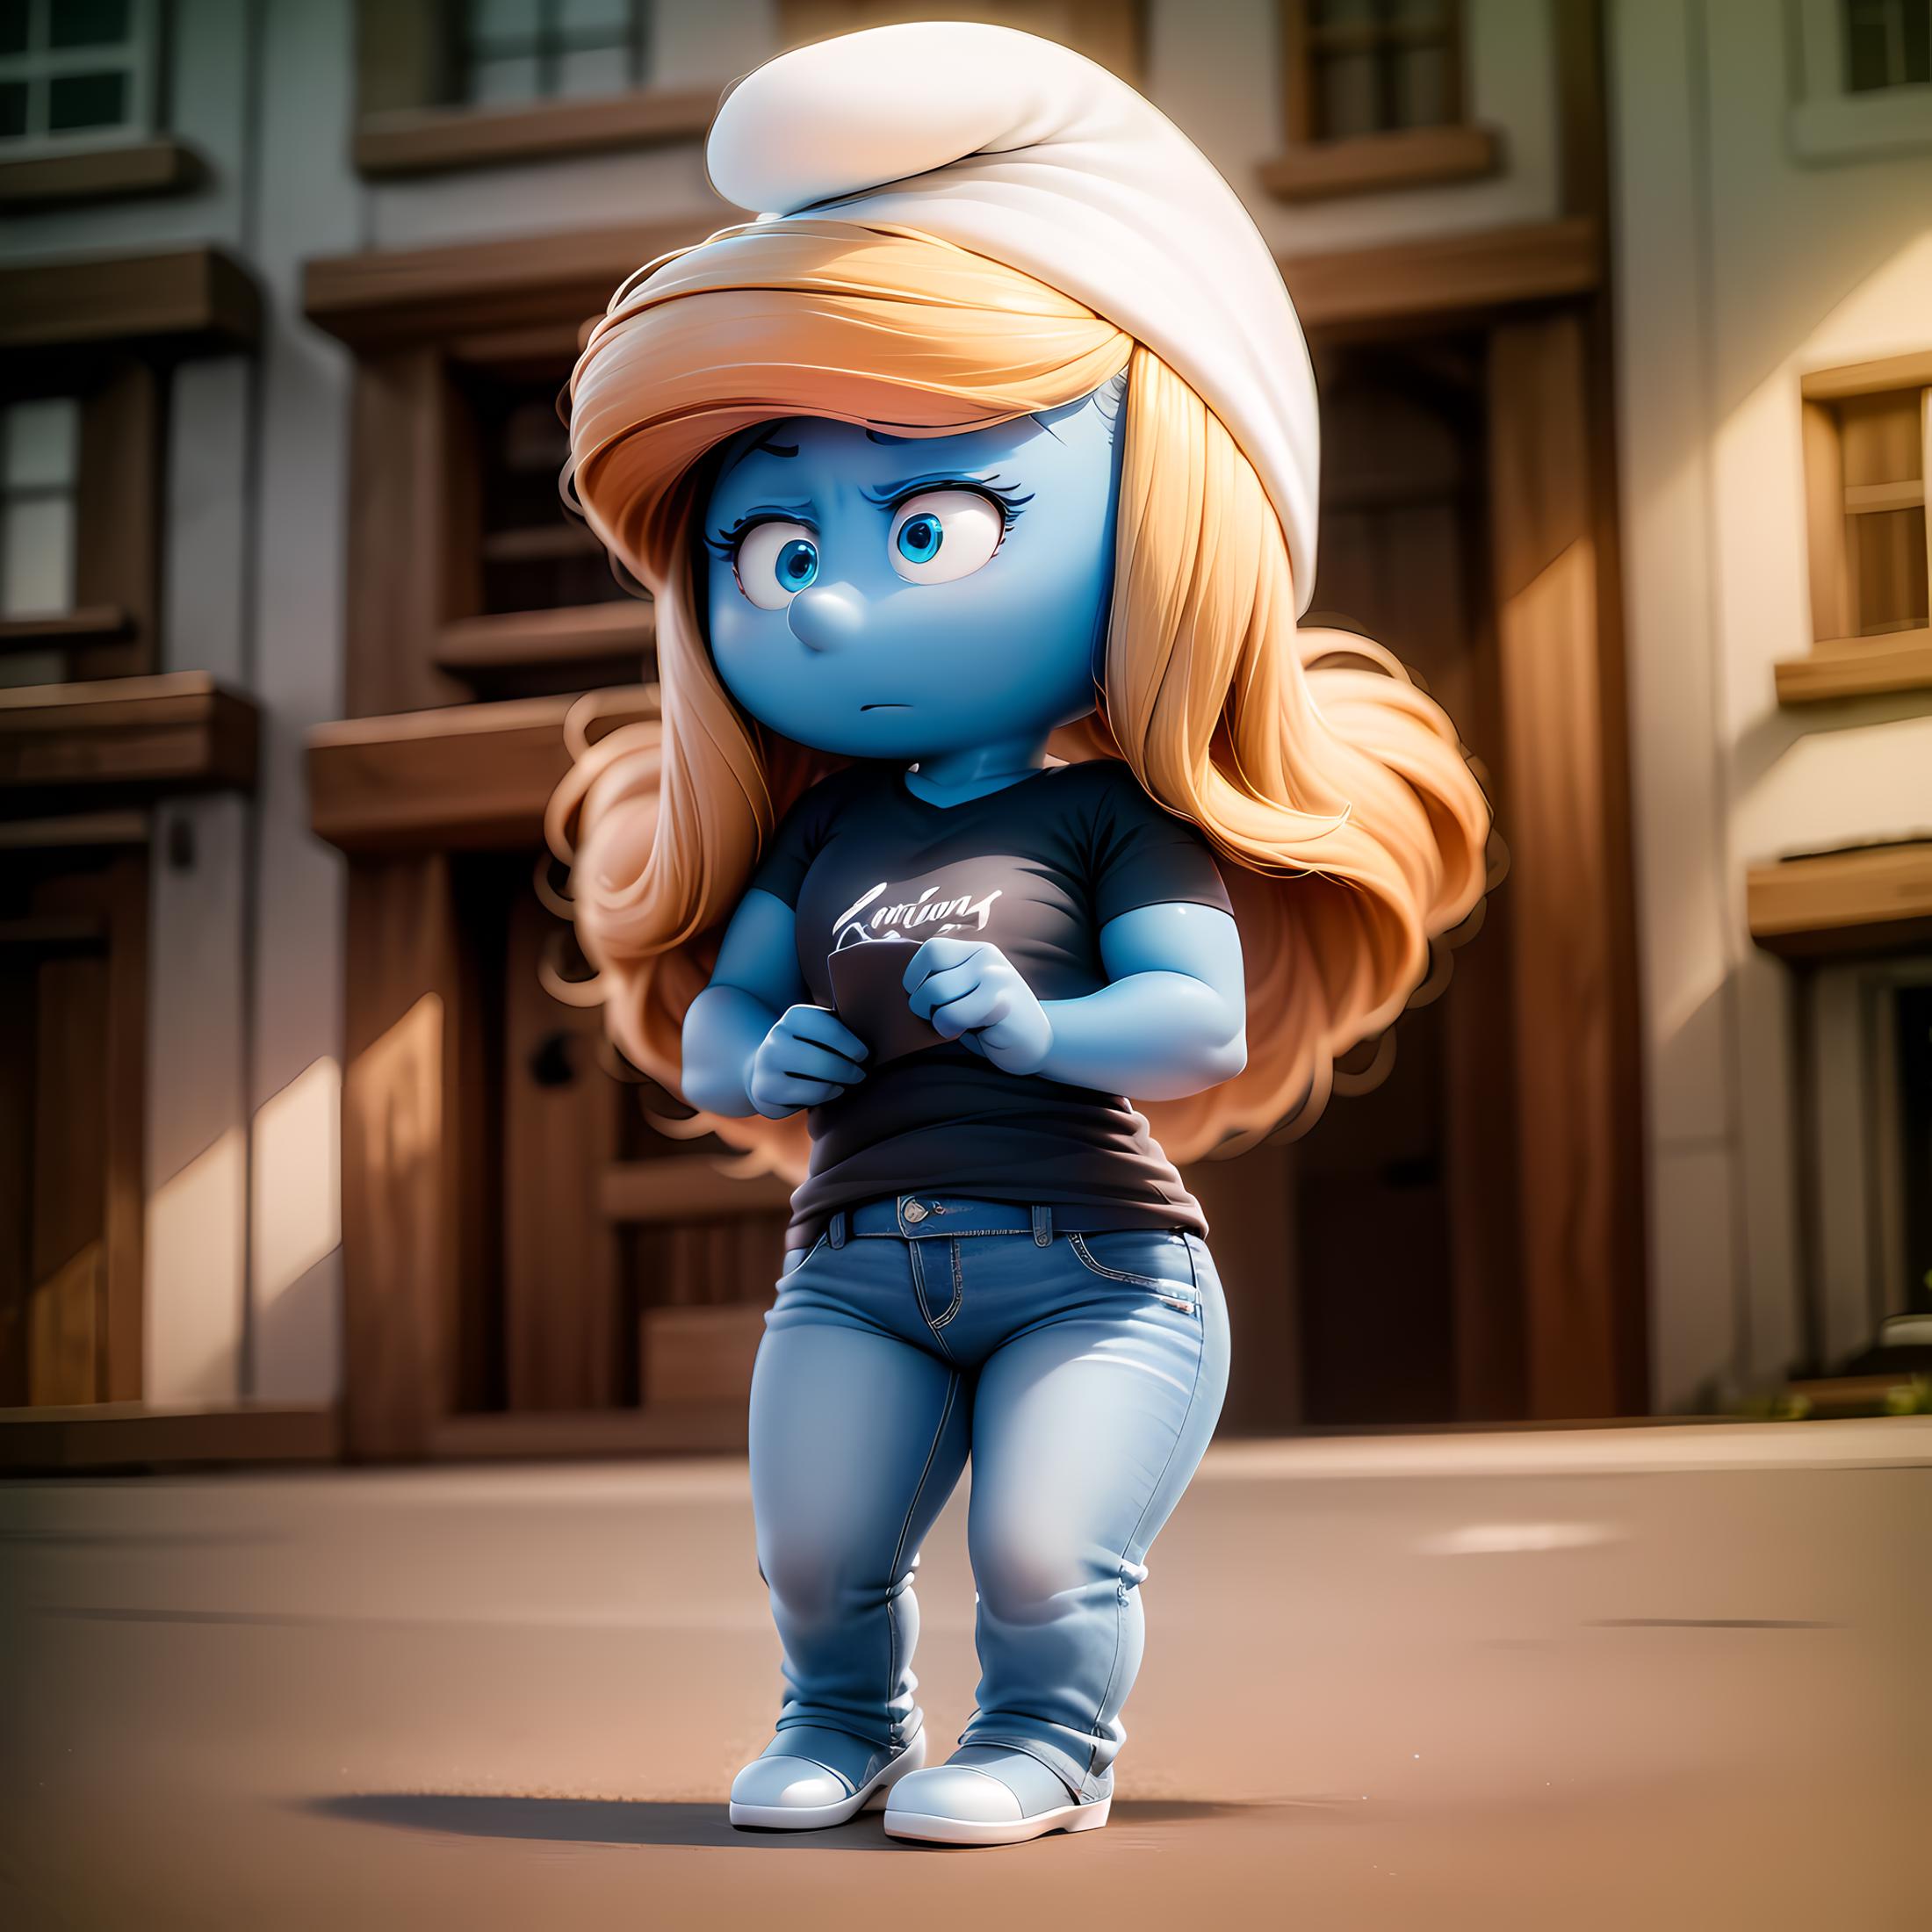 Smurfette [ The Smurfs ] image by TheGooder